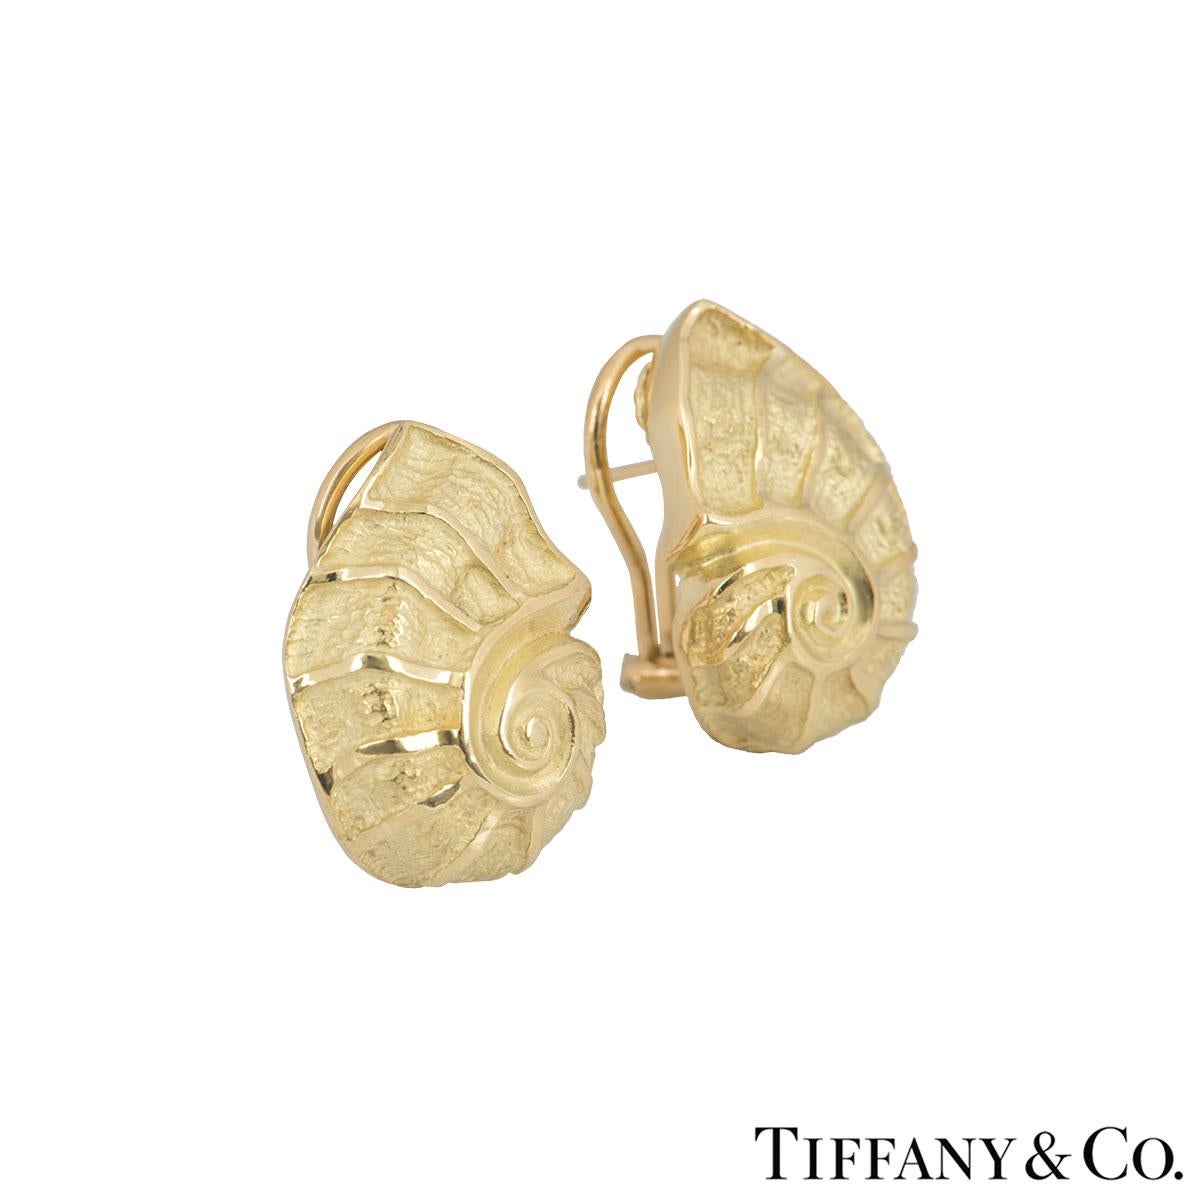 A pair of 18k yellow gold earrings by Tiffany & Co. The earrings are in a design of a nautilus shell in yellow gold. The earrings feature a post with lever-hinged fitting and measure 2.30cm in length, width of 1.60cm and a gross weight of 19.00